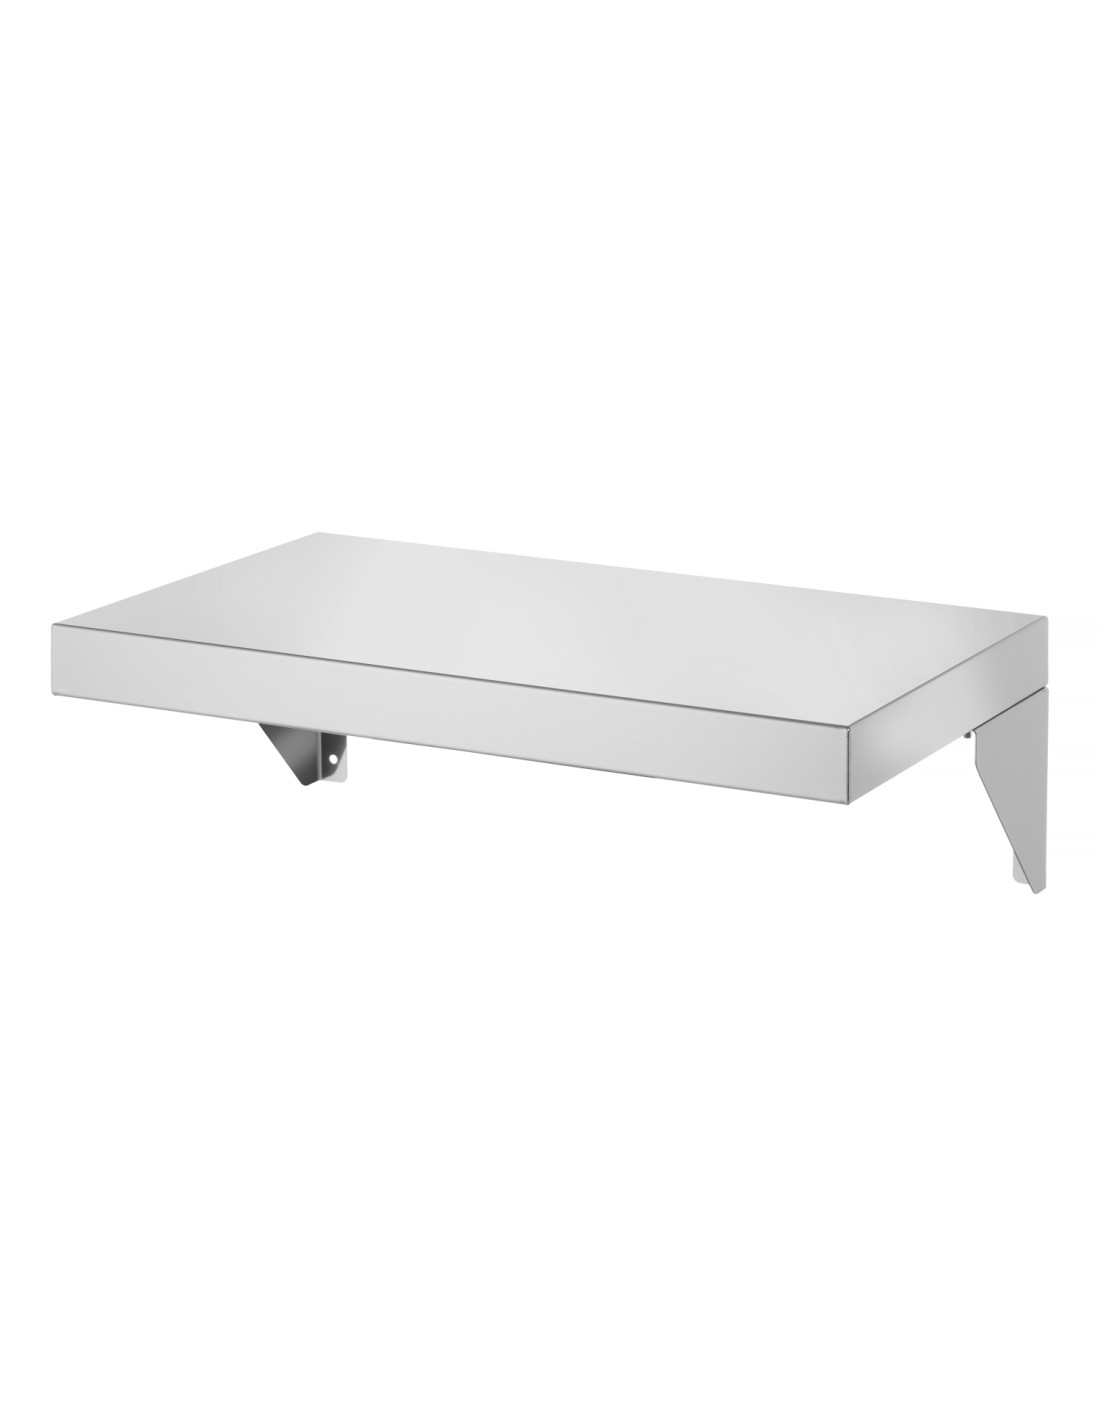 Side shelf for Green Fire barbecue - mm 480 x 298 x 160h